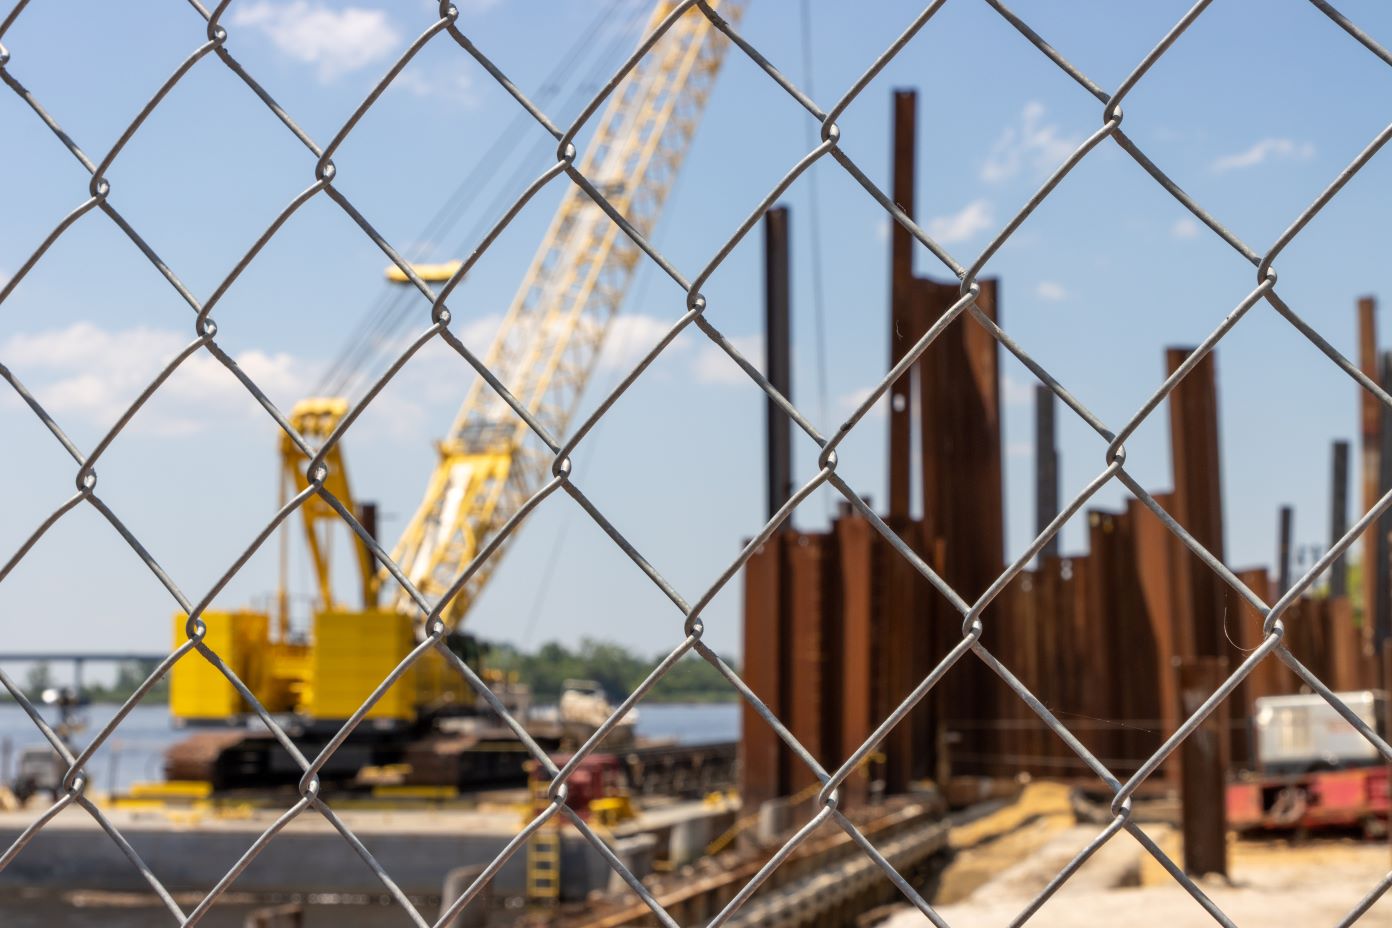 A crane works in a construction site, seen through a chain link fence